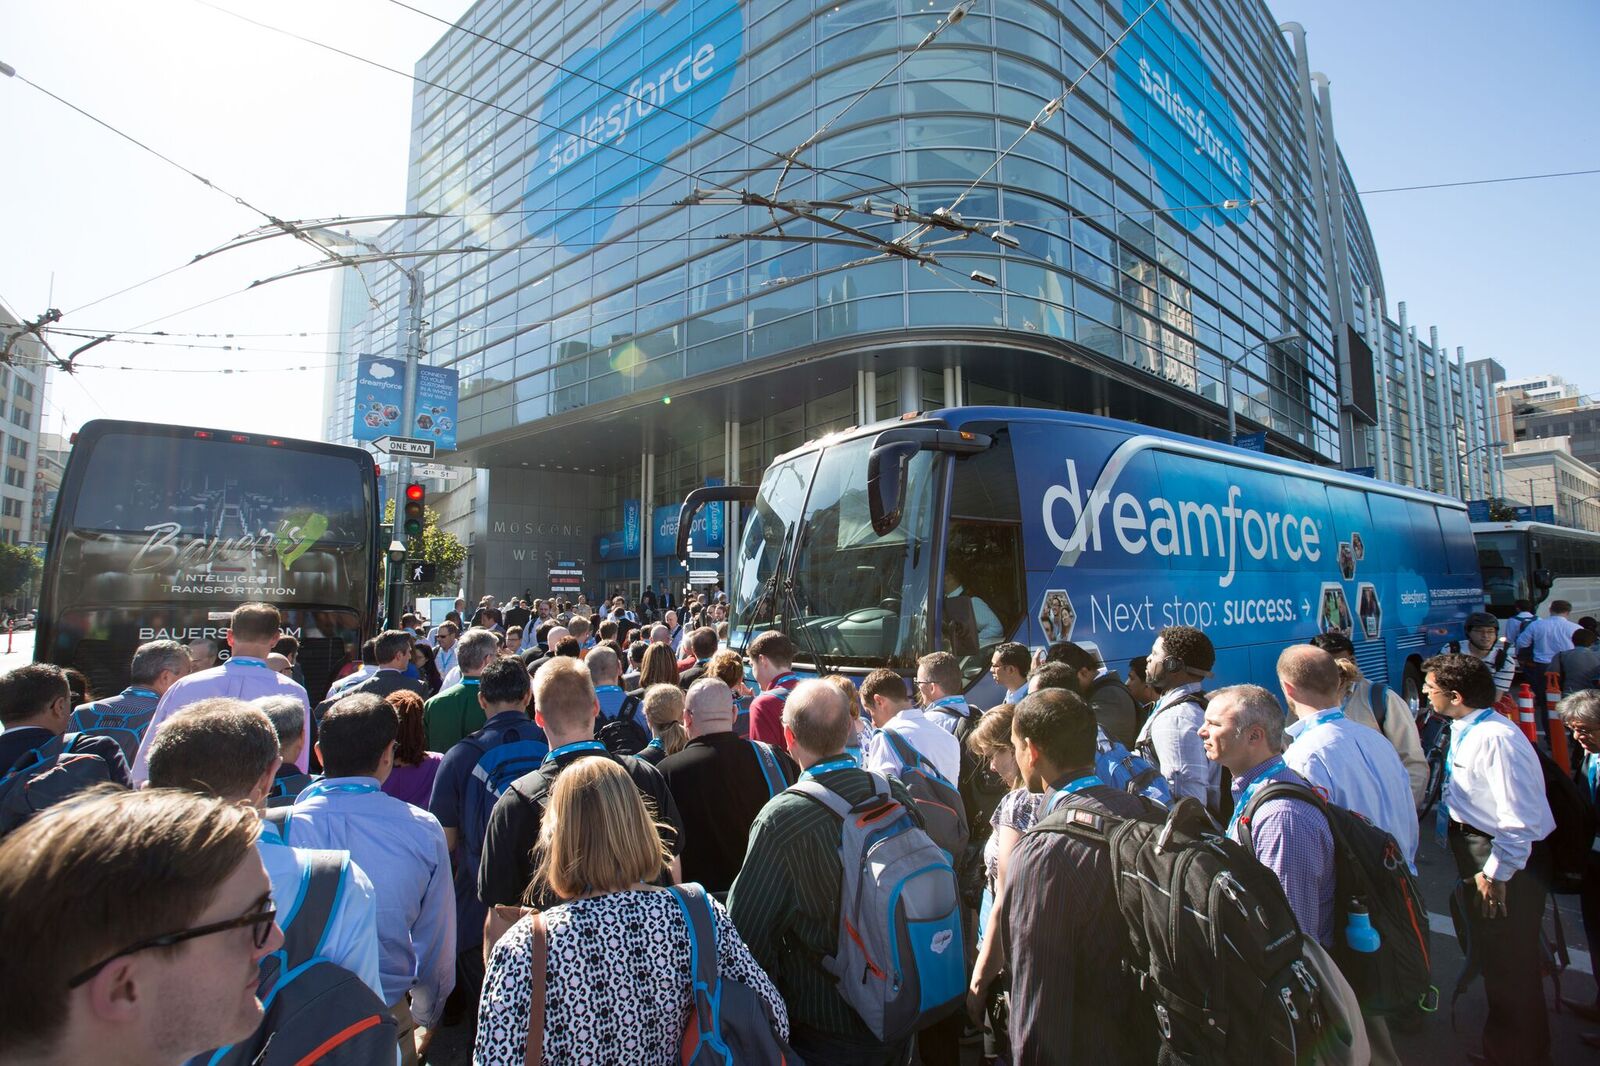 Tuesday Agenda: Kick Off Your Dreamforce Week with These 8 Activities